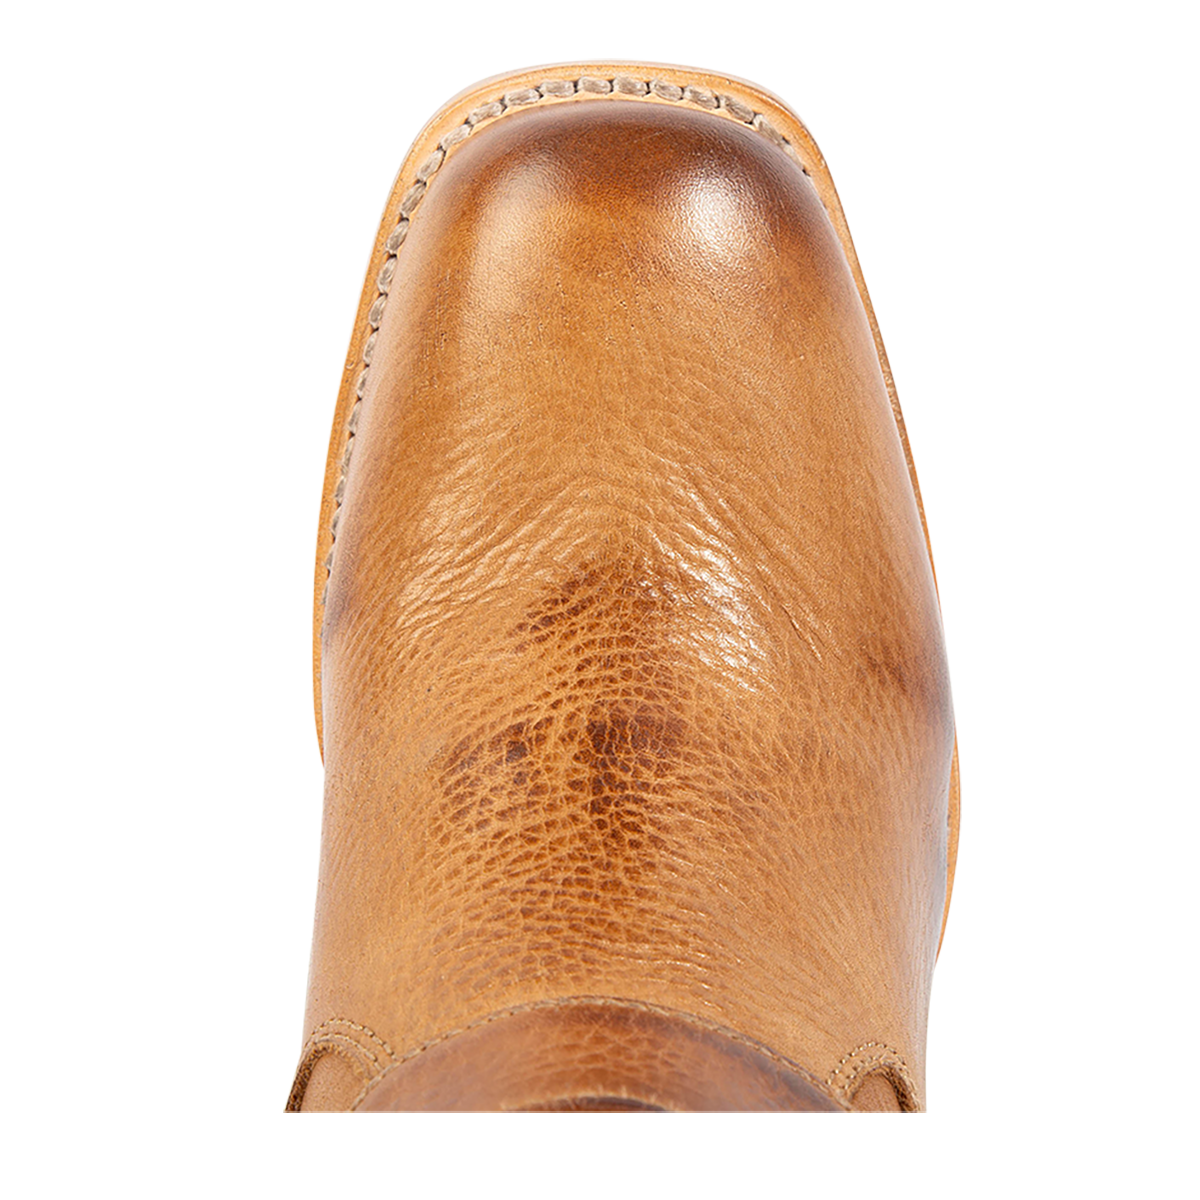 Top view showing square toe on FREEBIRD women's Darcy wheat leather boot